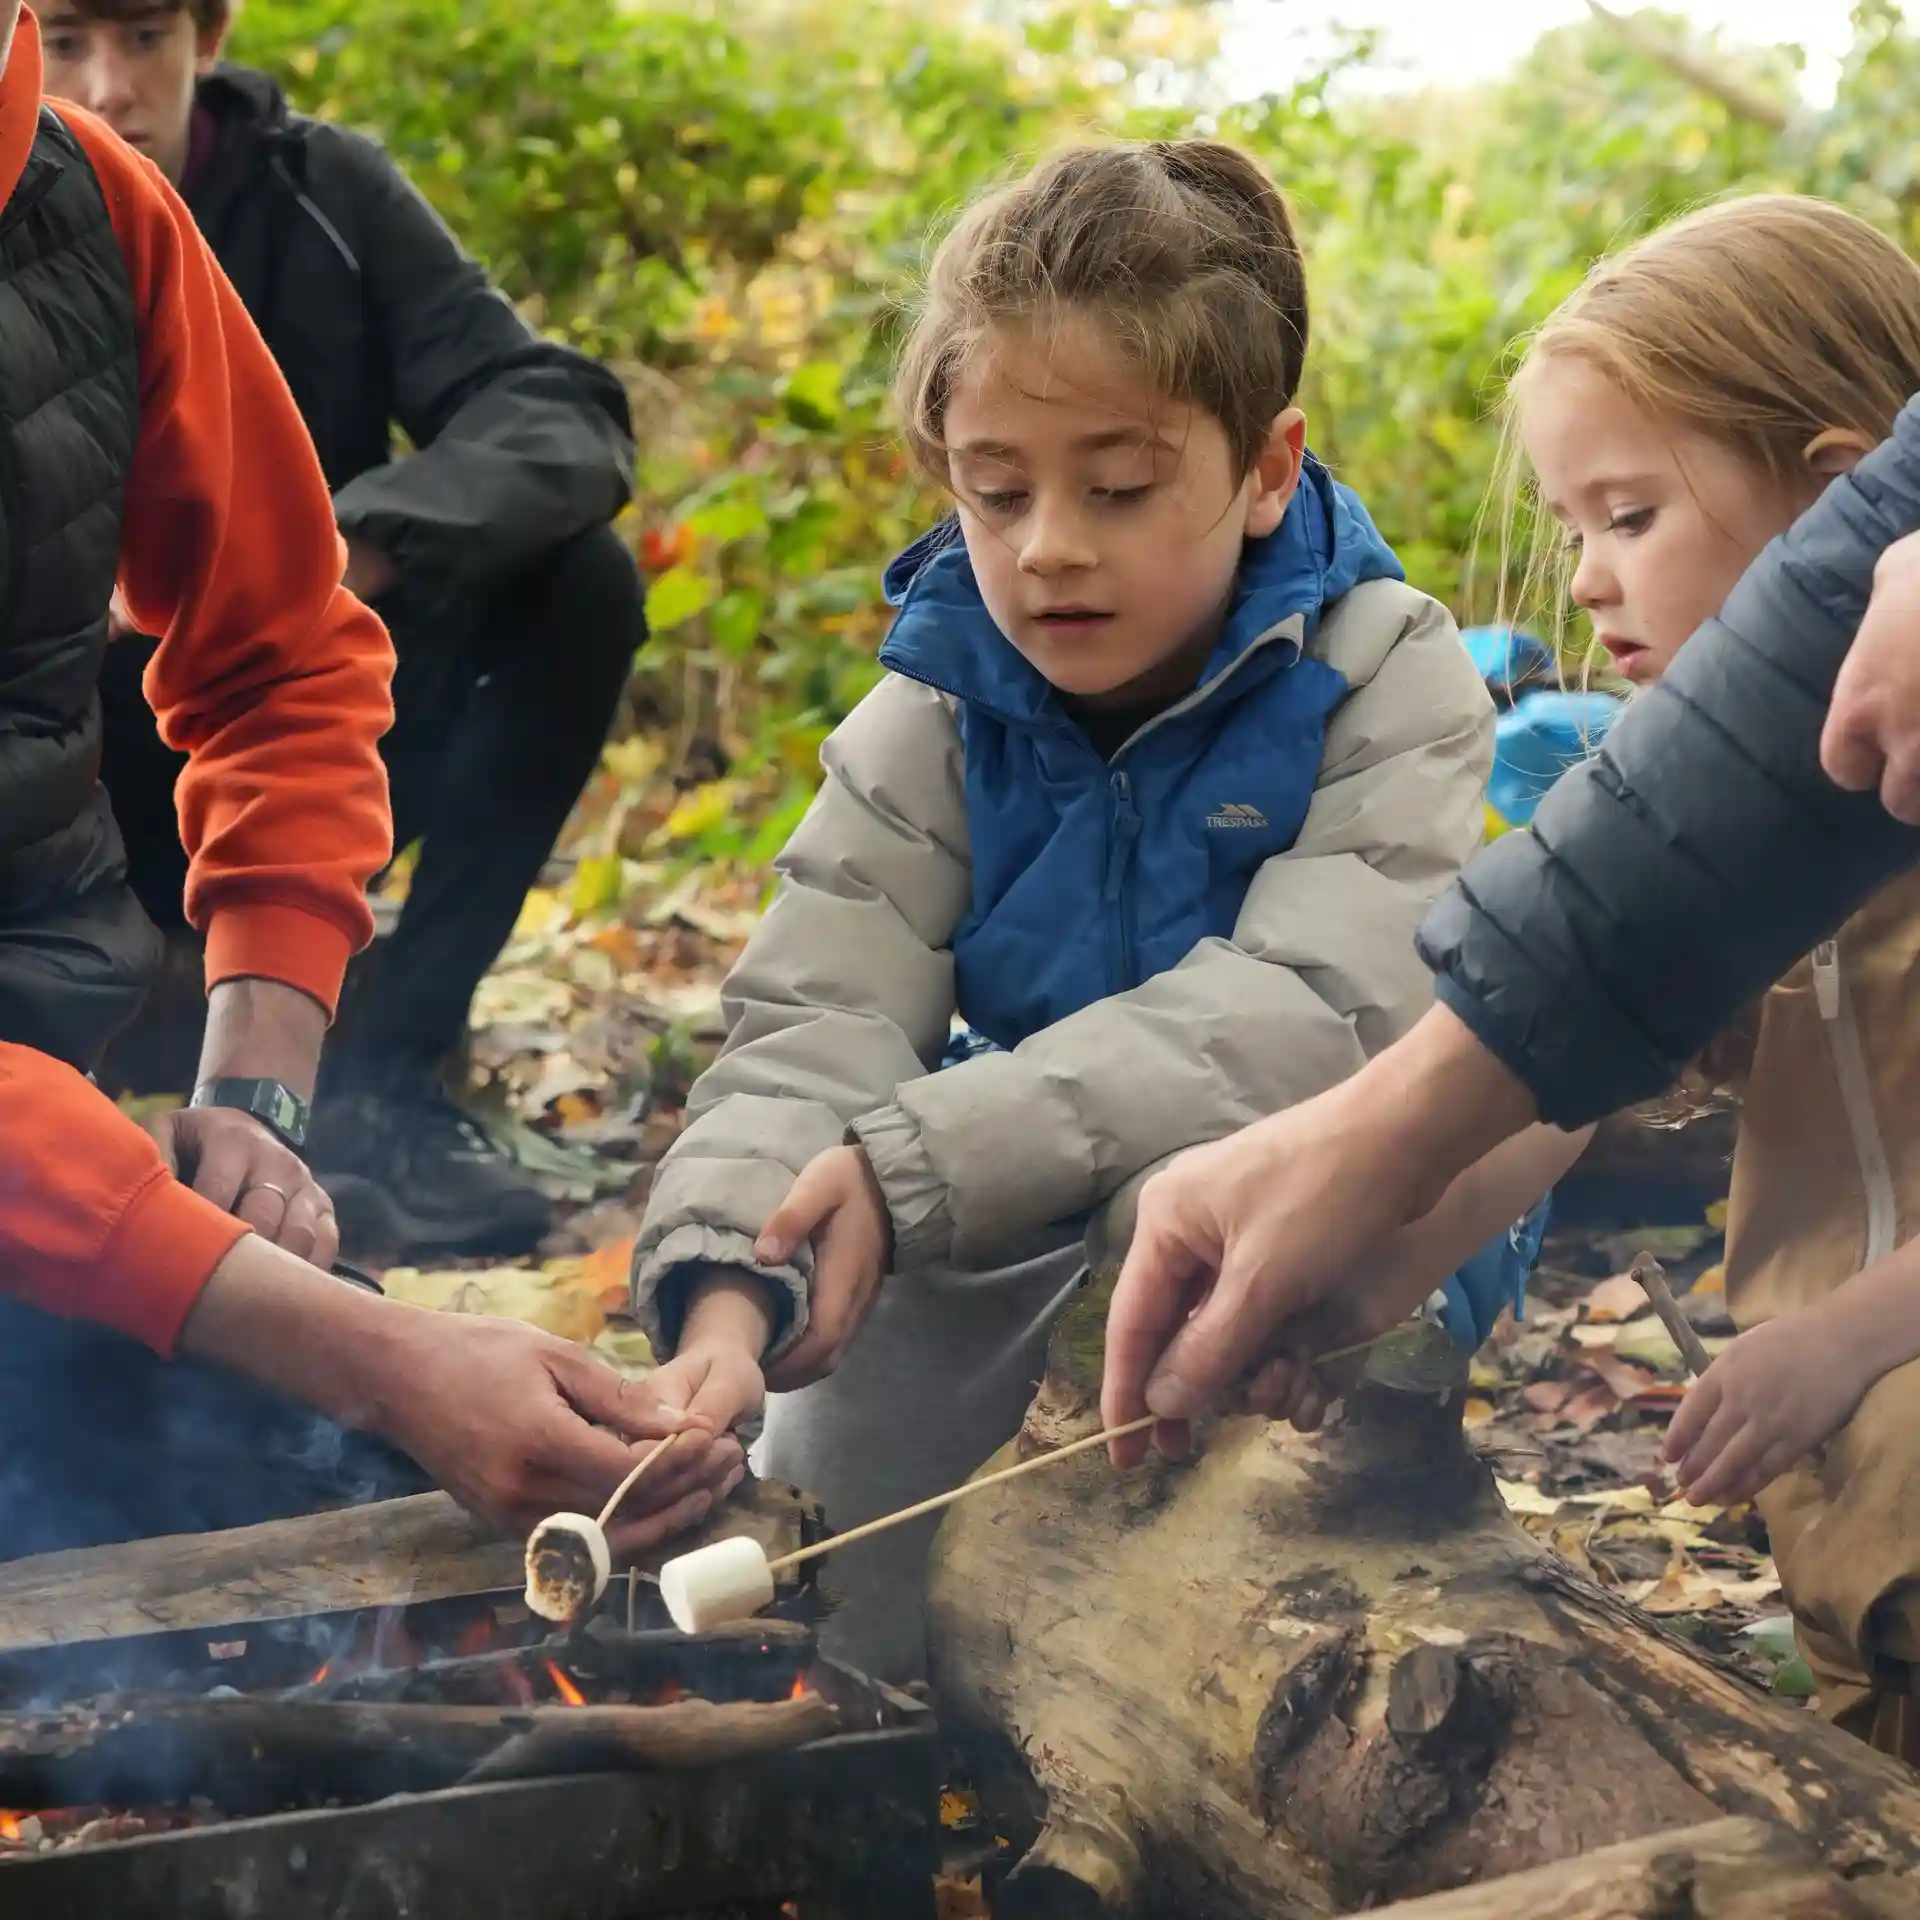 A close up of children roasting marshmallows.